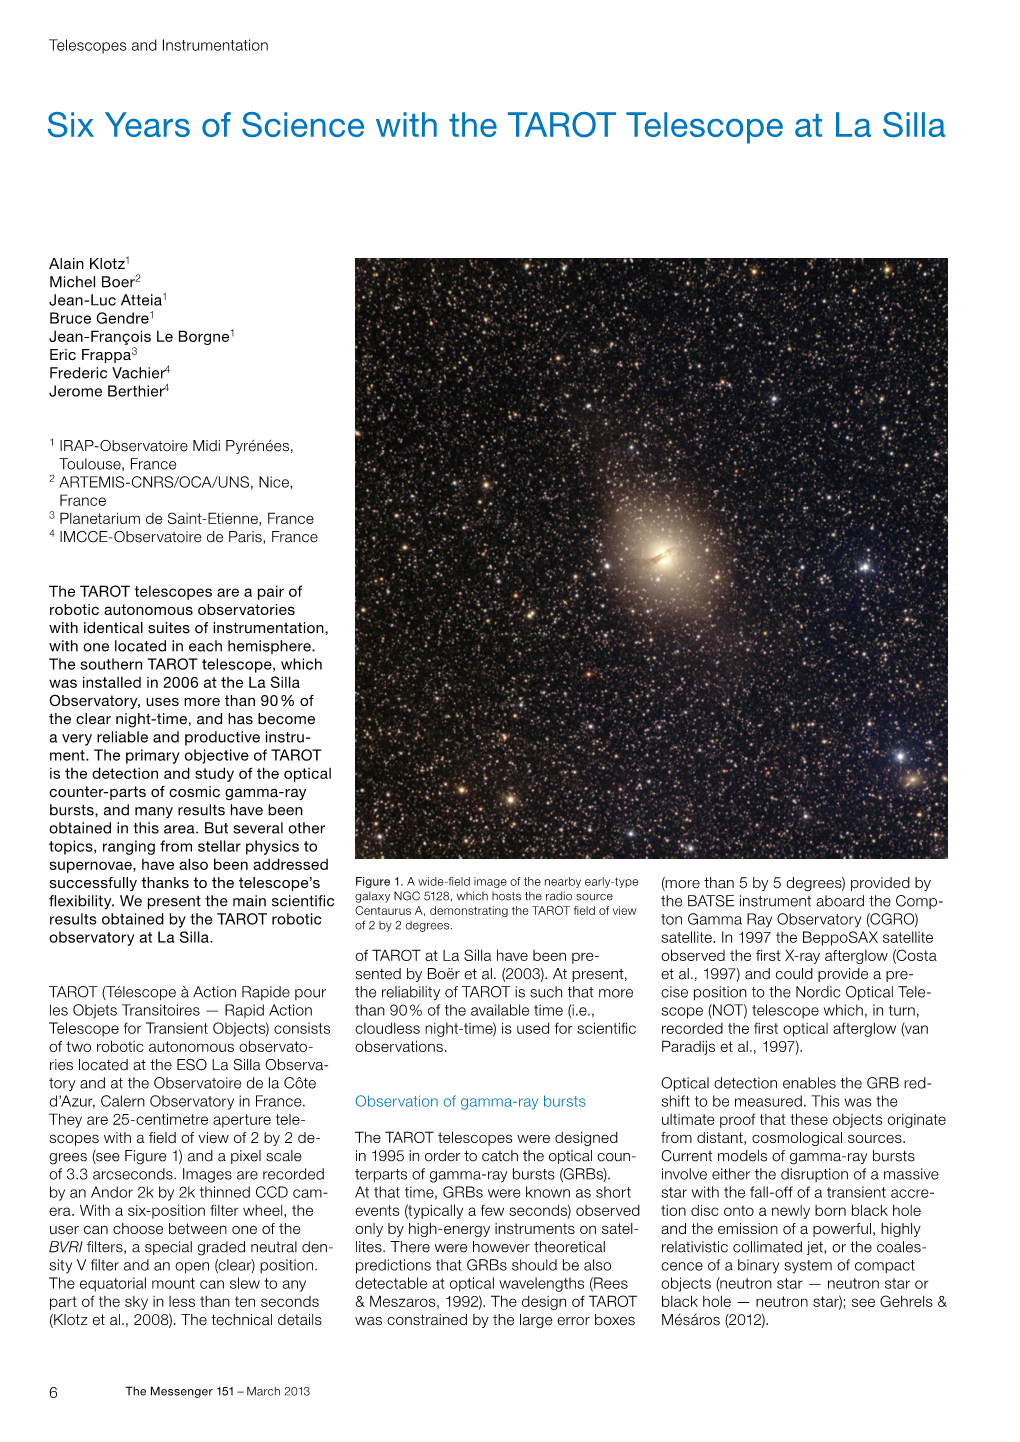 Six Years of Science with the TAROT Telescope at La Silla